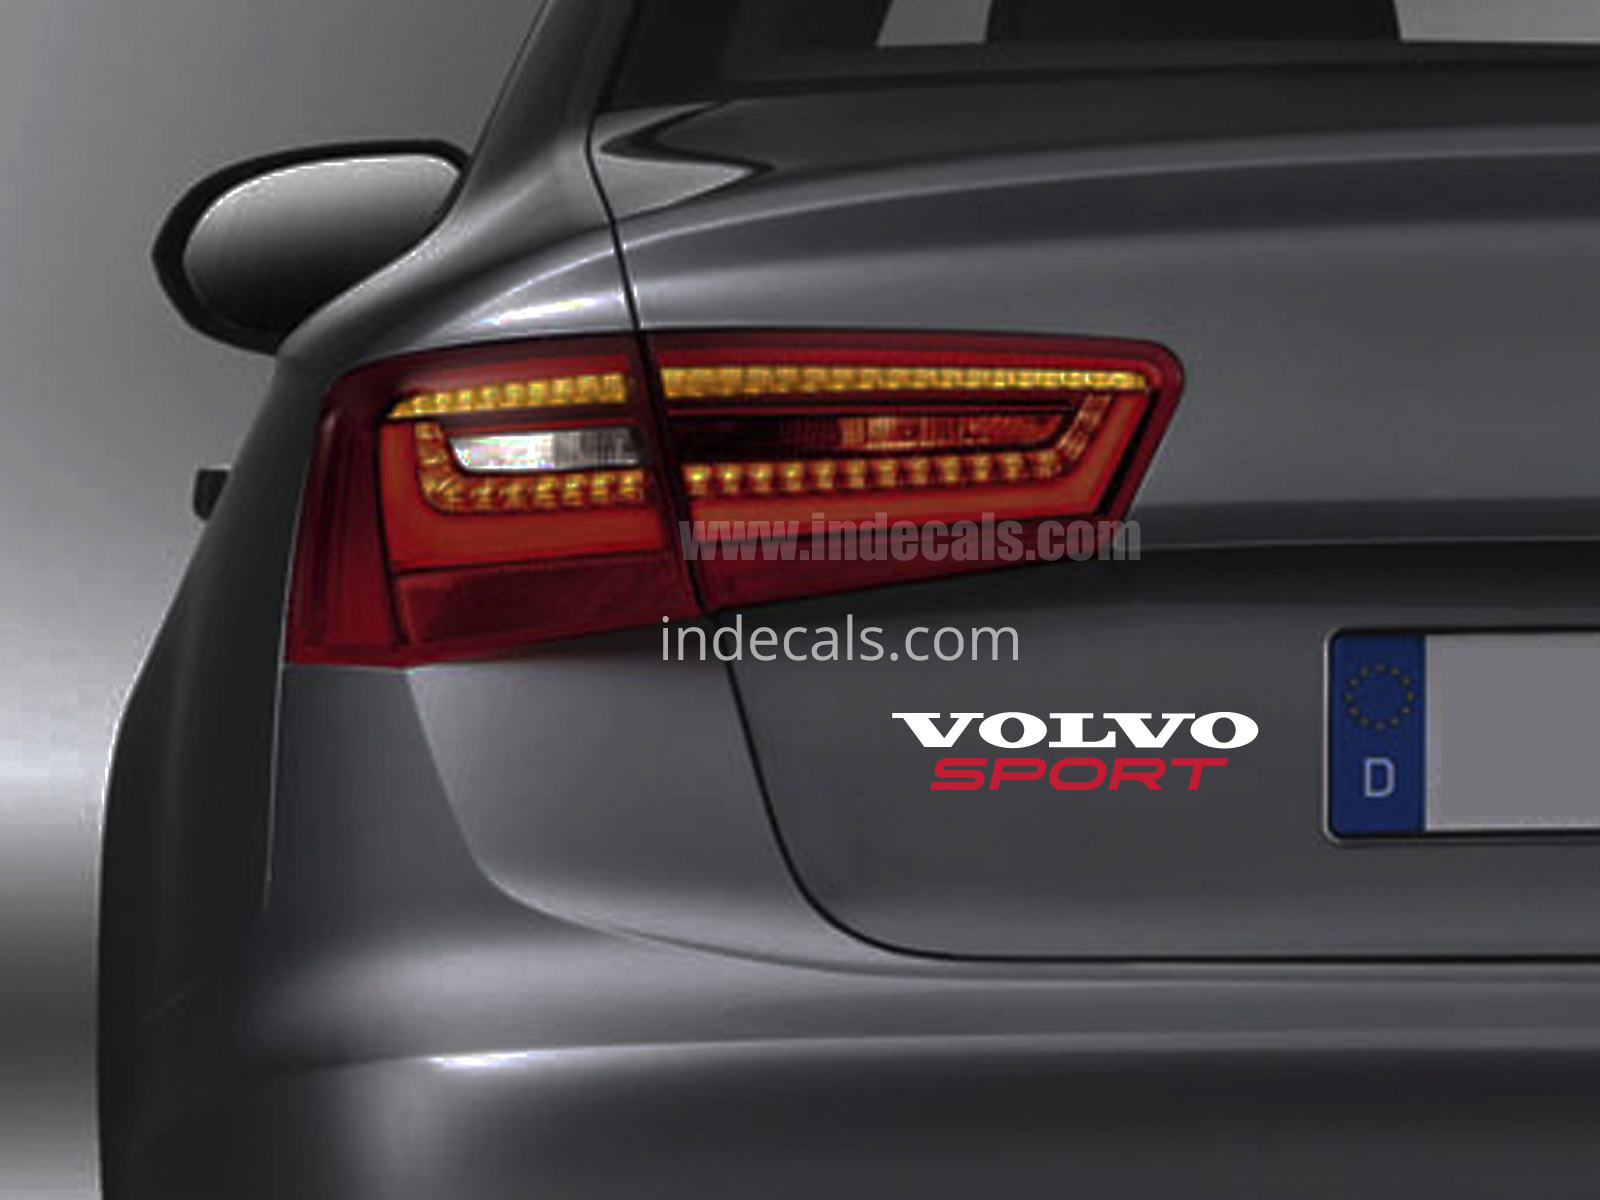 1 x Volvo Sports Sticker for Trunk - White & Red